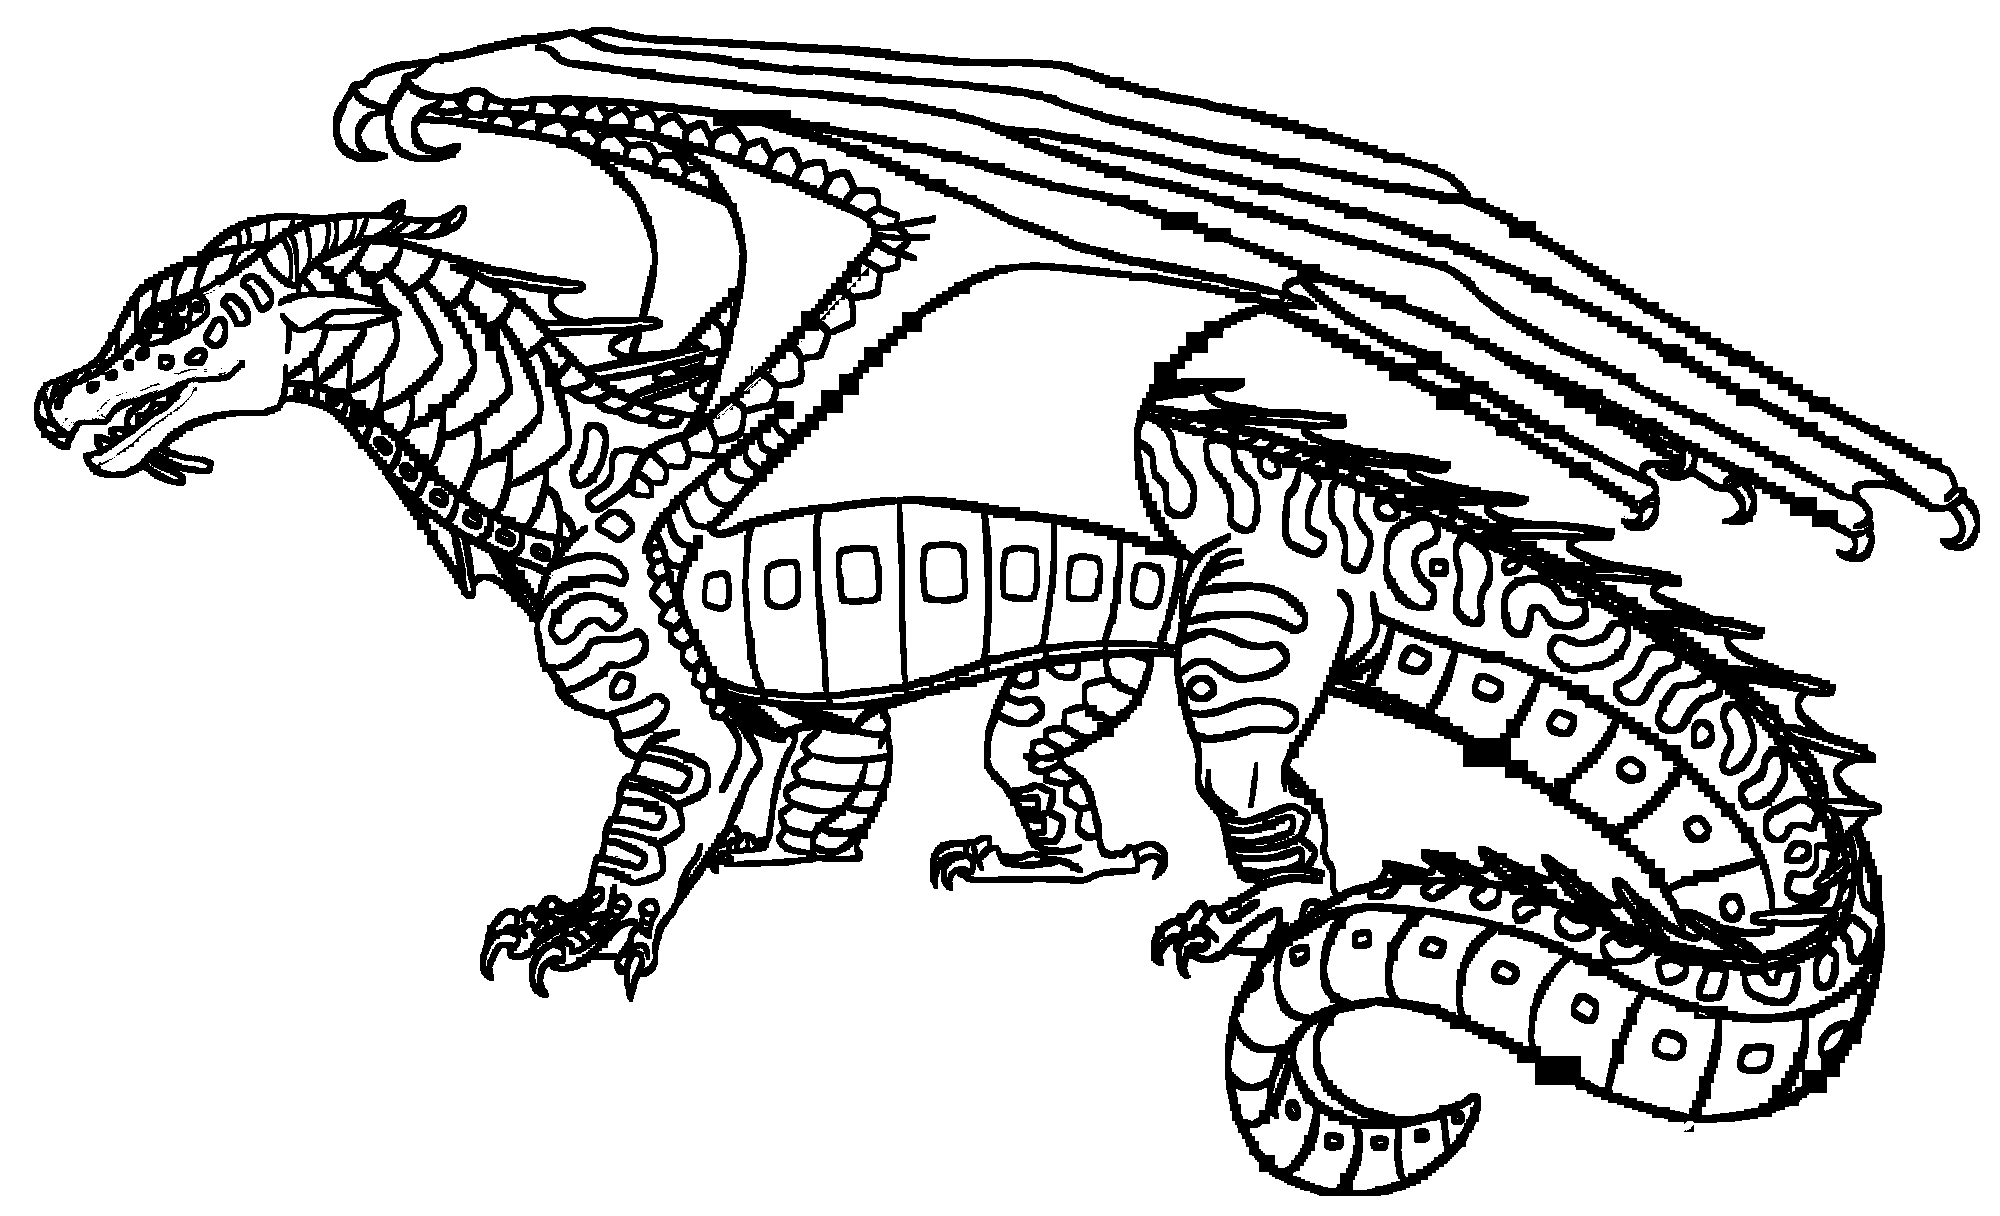 Wings Of Fire Dragon Coloring Pages at GetColorings.com | Free